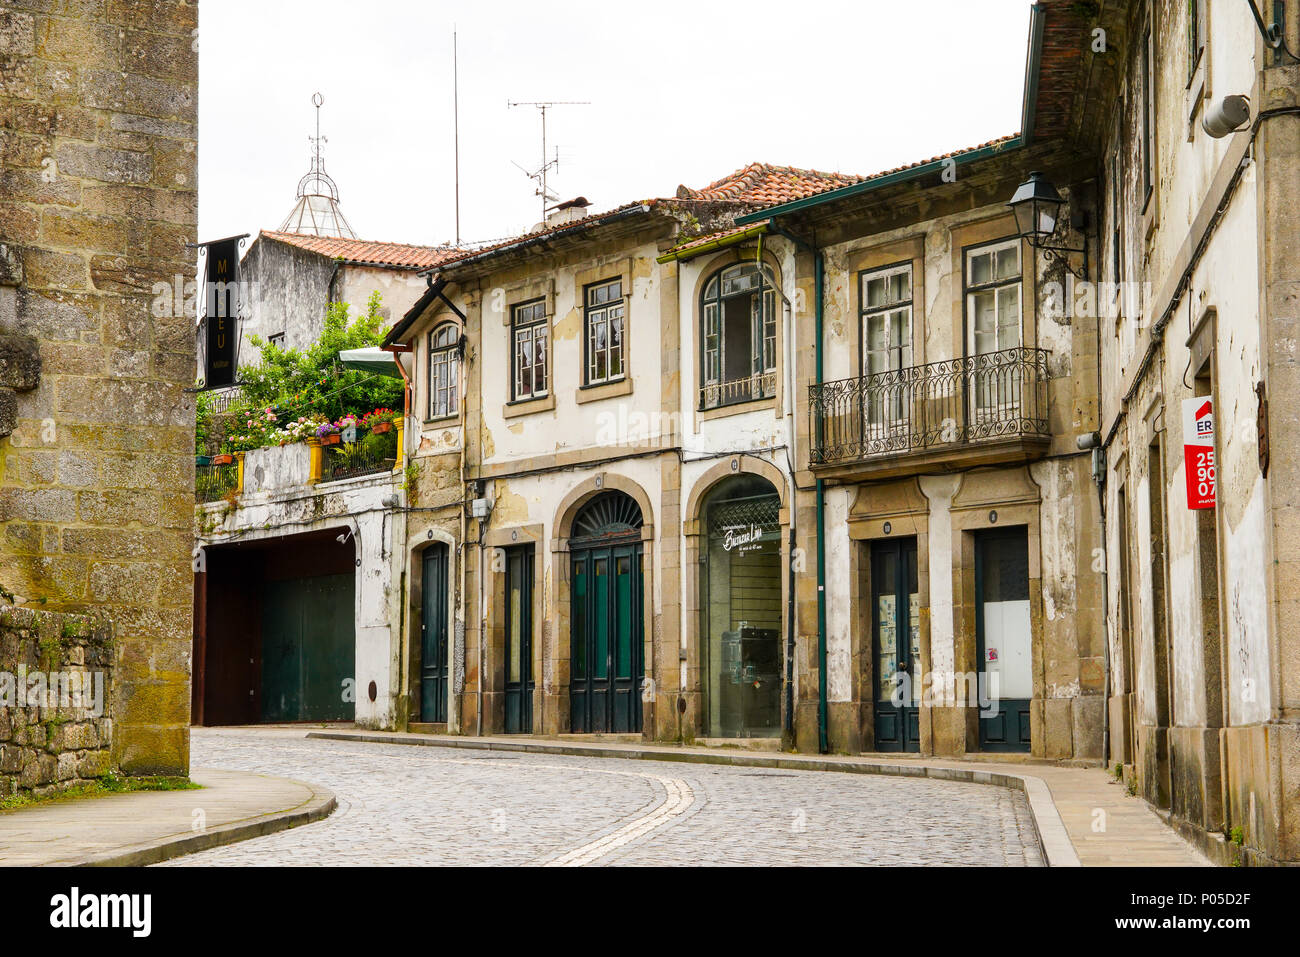 Street in Old Town Ponte de Lima, Minho Province, Portugal. Stock Photo